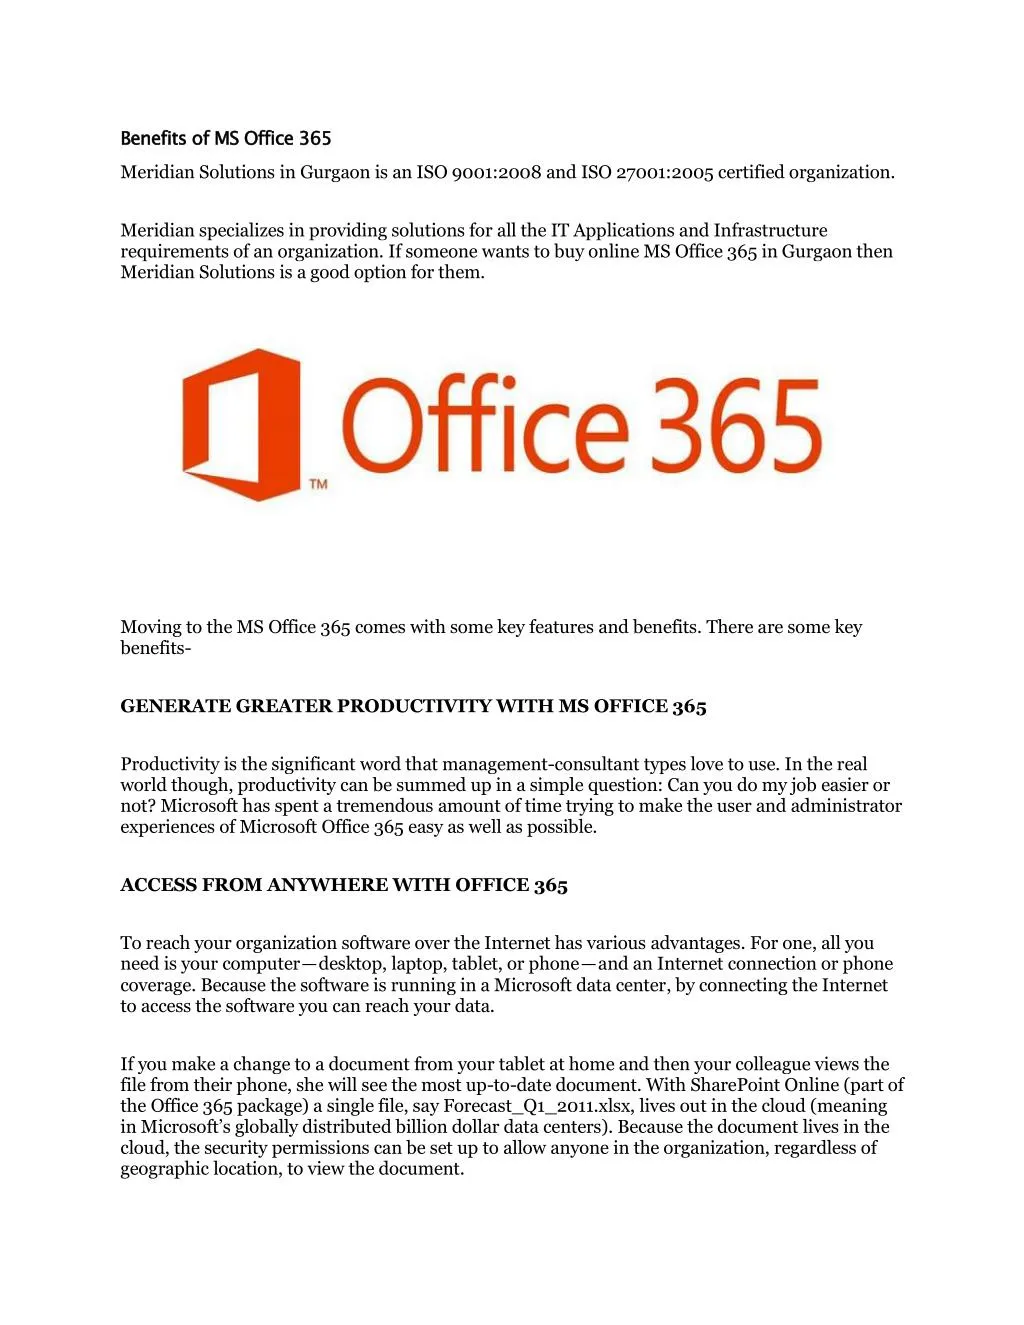 benefits of ms office meridian solutions